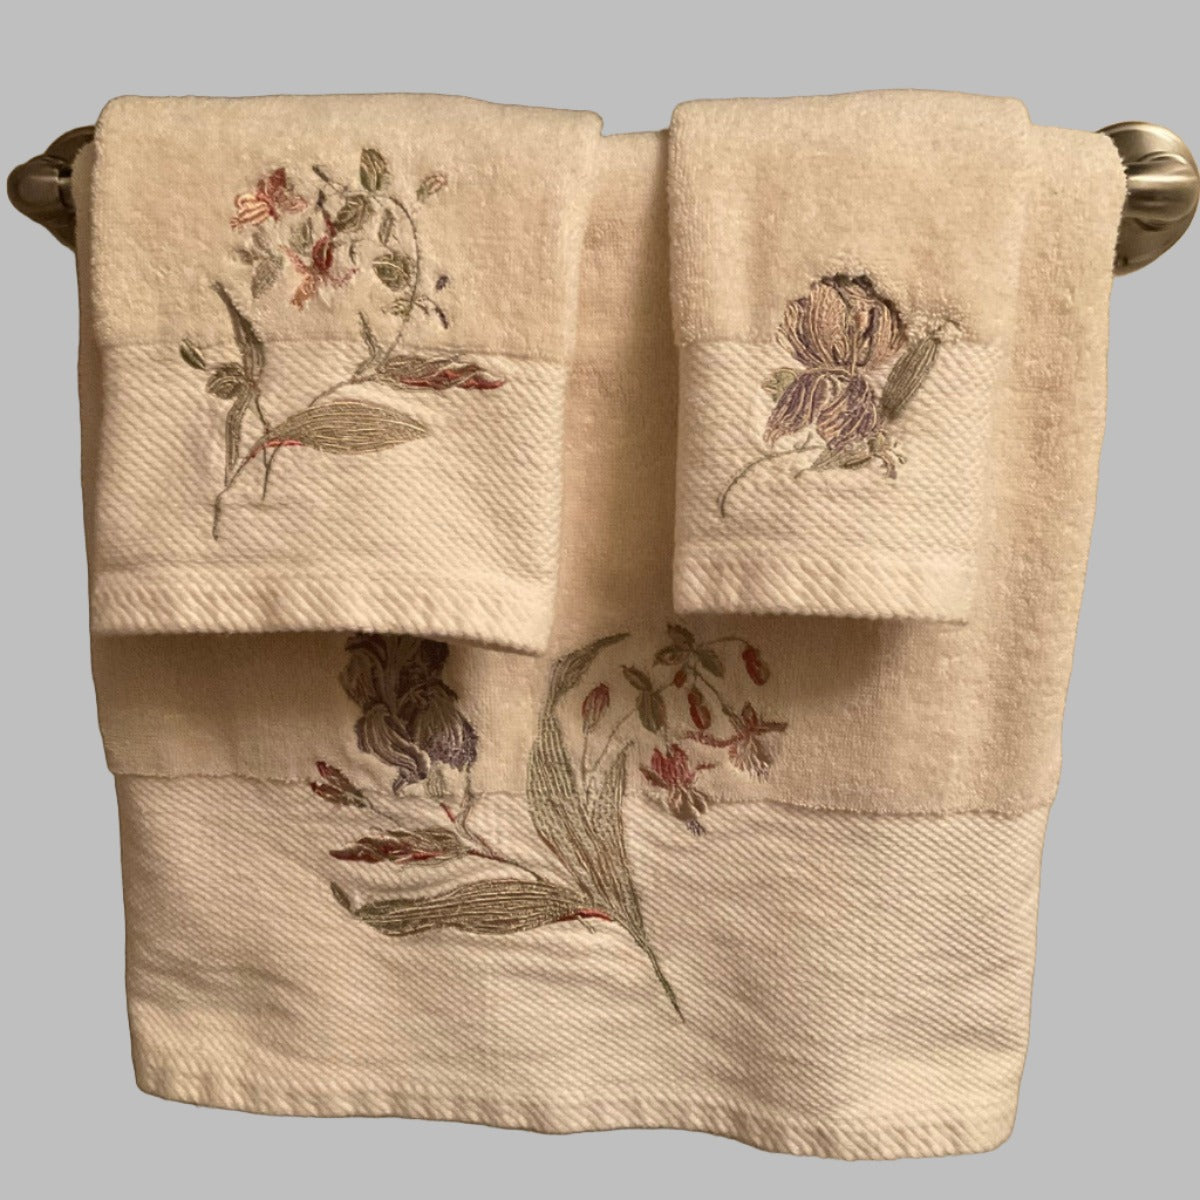 Bathroom Towels with Floral Pattern - Set of 3